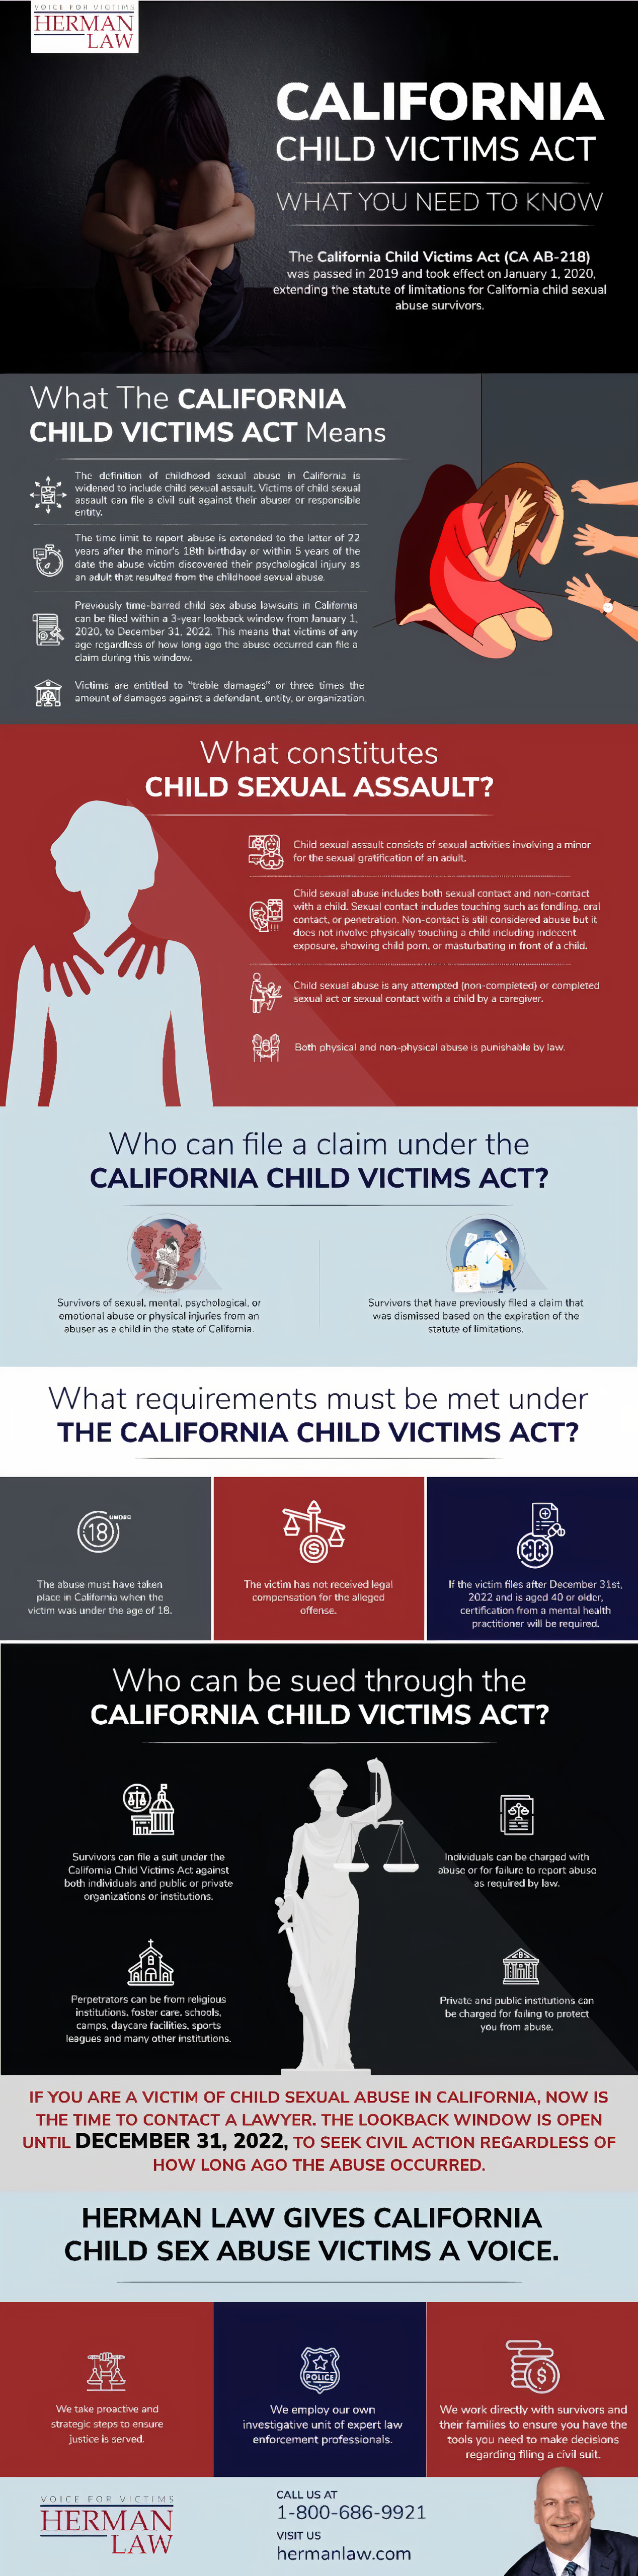 California Child Victim Act - What you need to know